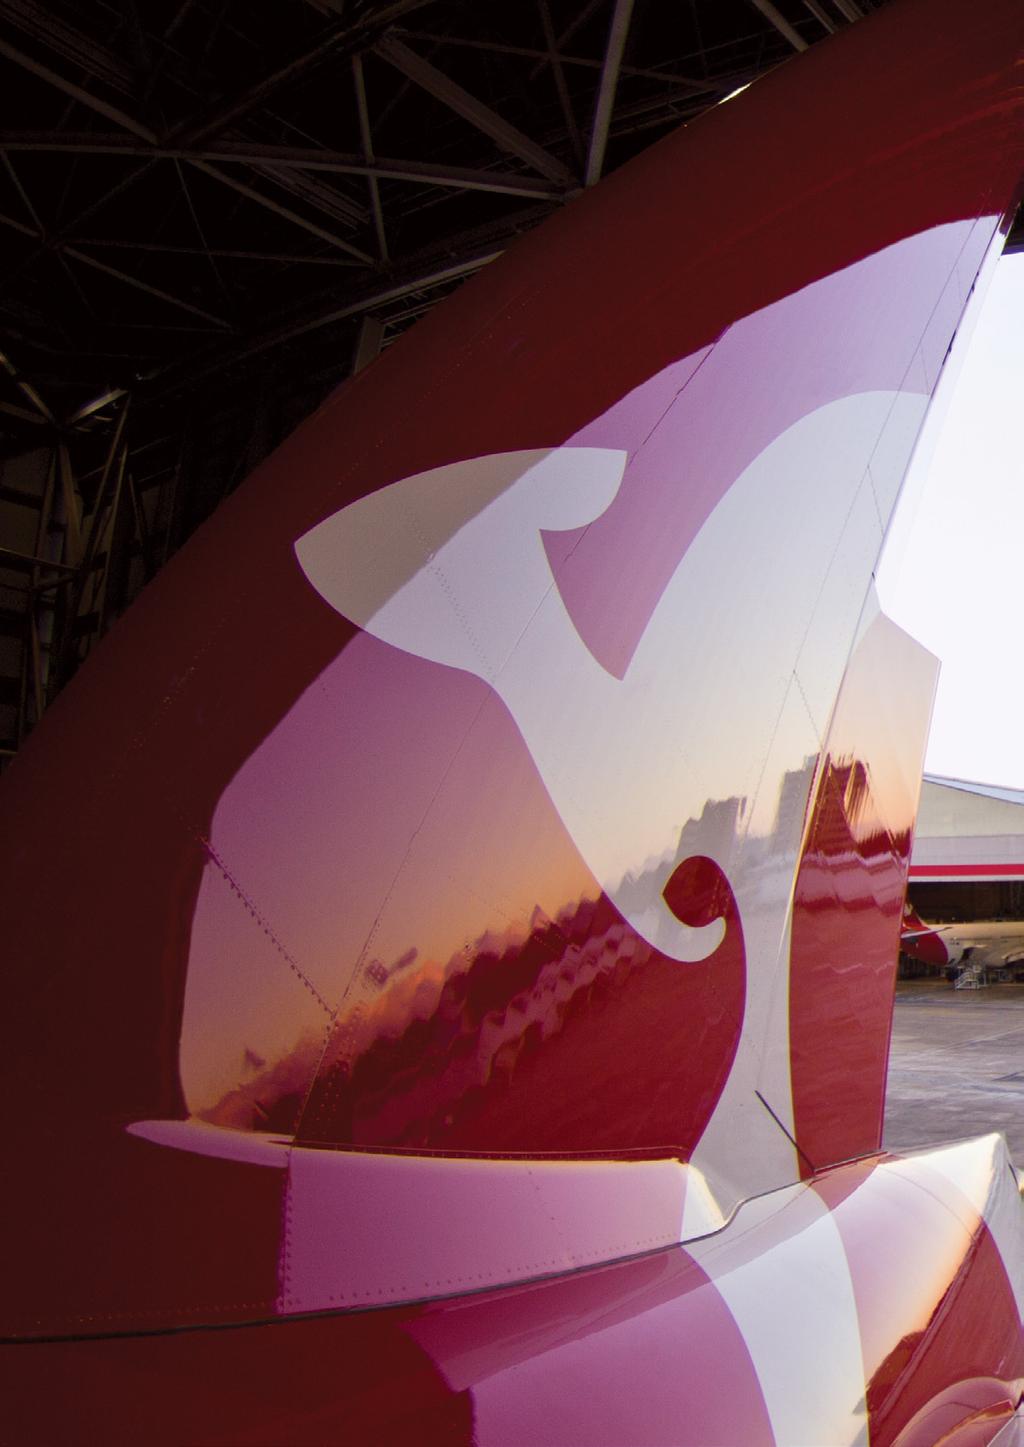 004 QANTAS ANNUAL REPORT Heading For the Qantas Group, / was a year of transformation. We recorded an Underlying Profit Before Tax * despite significant challenges.